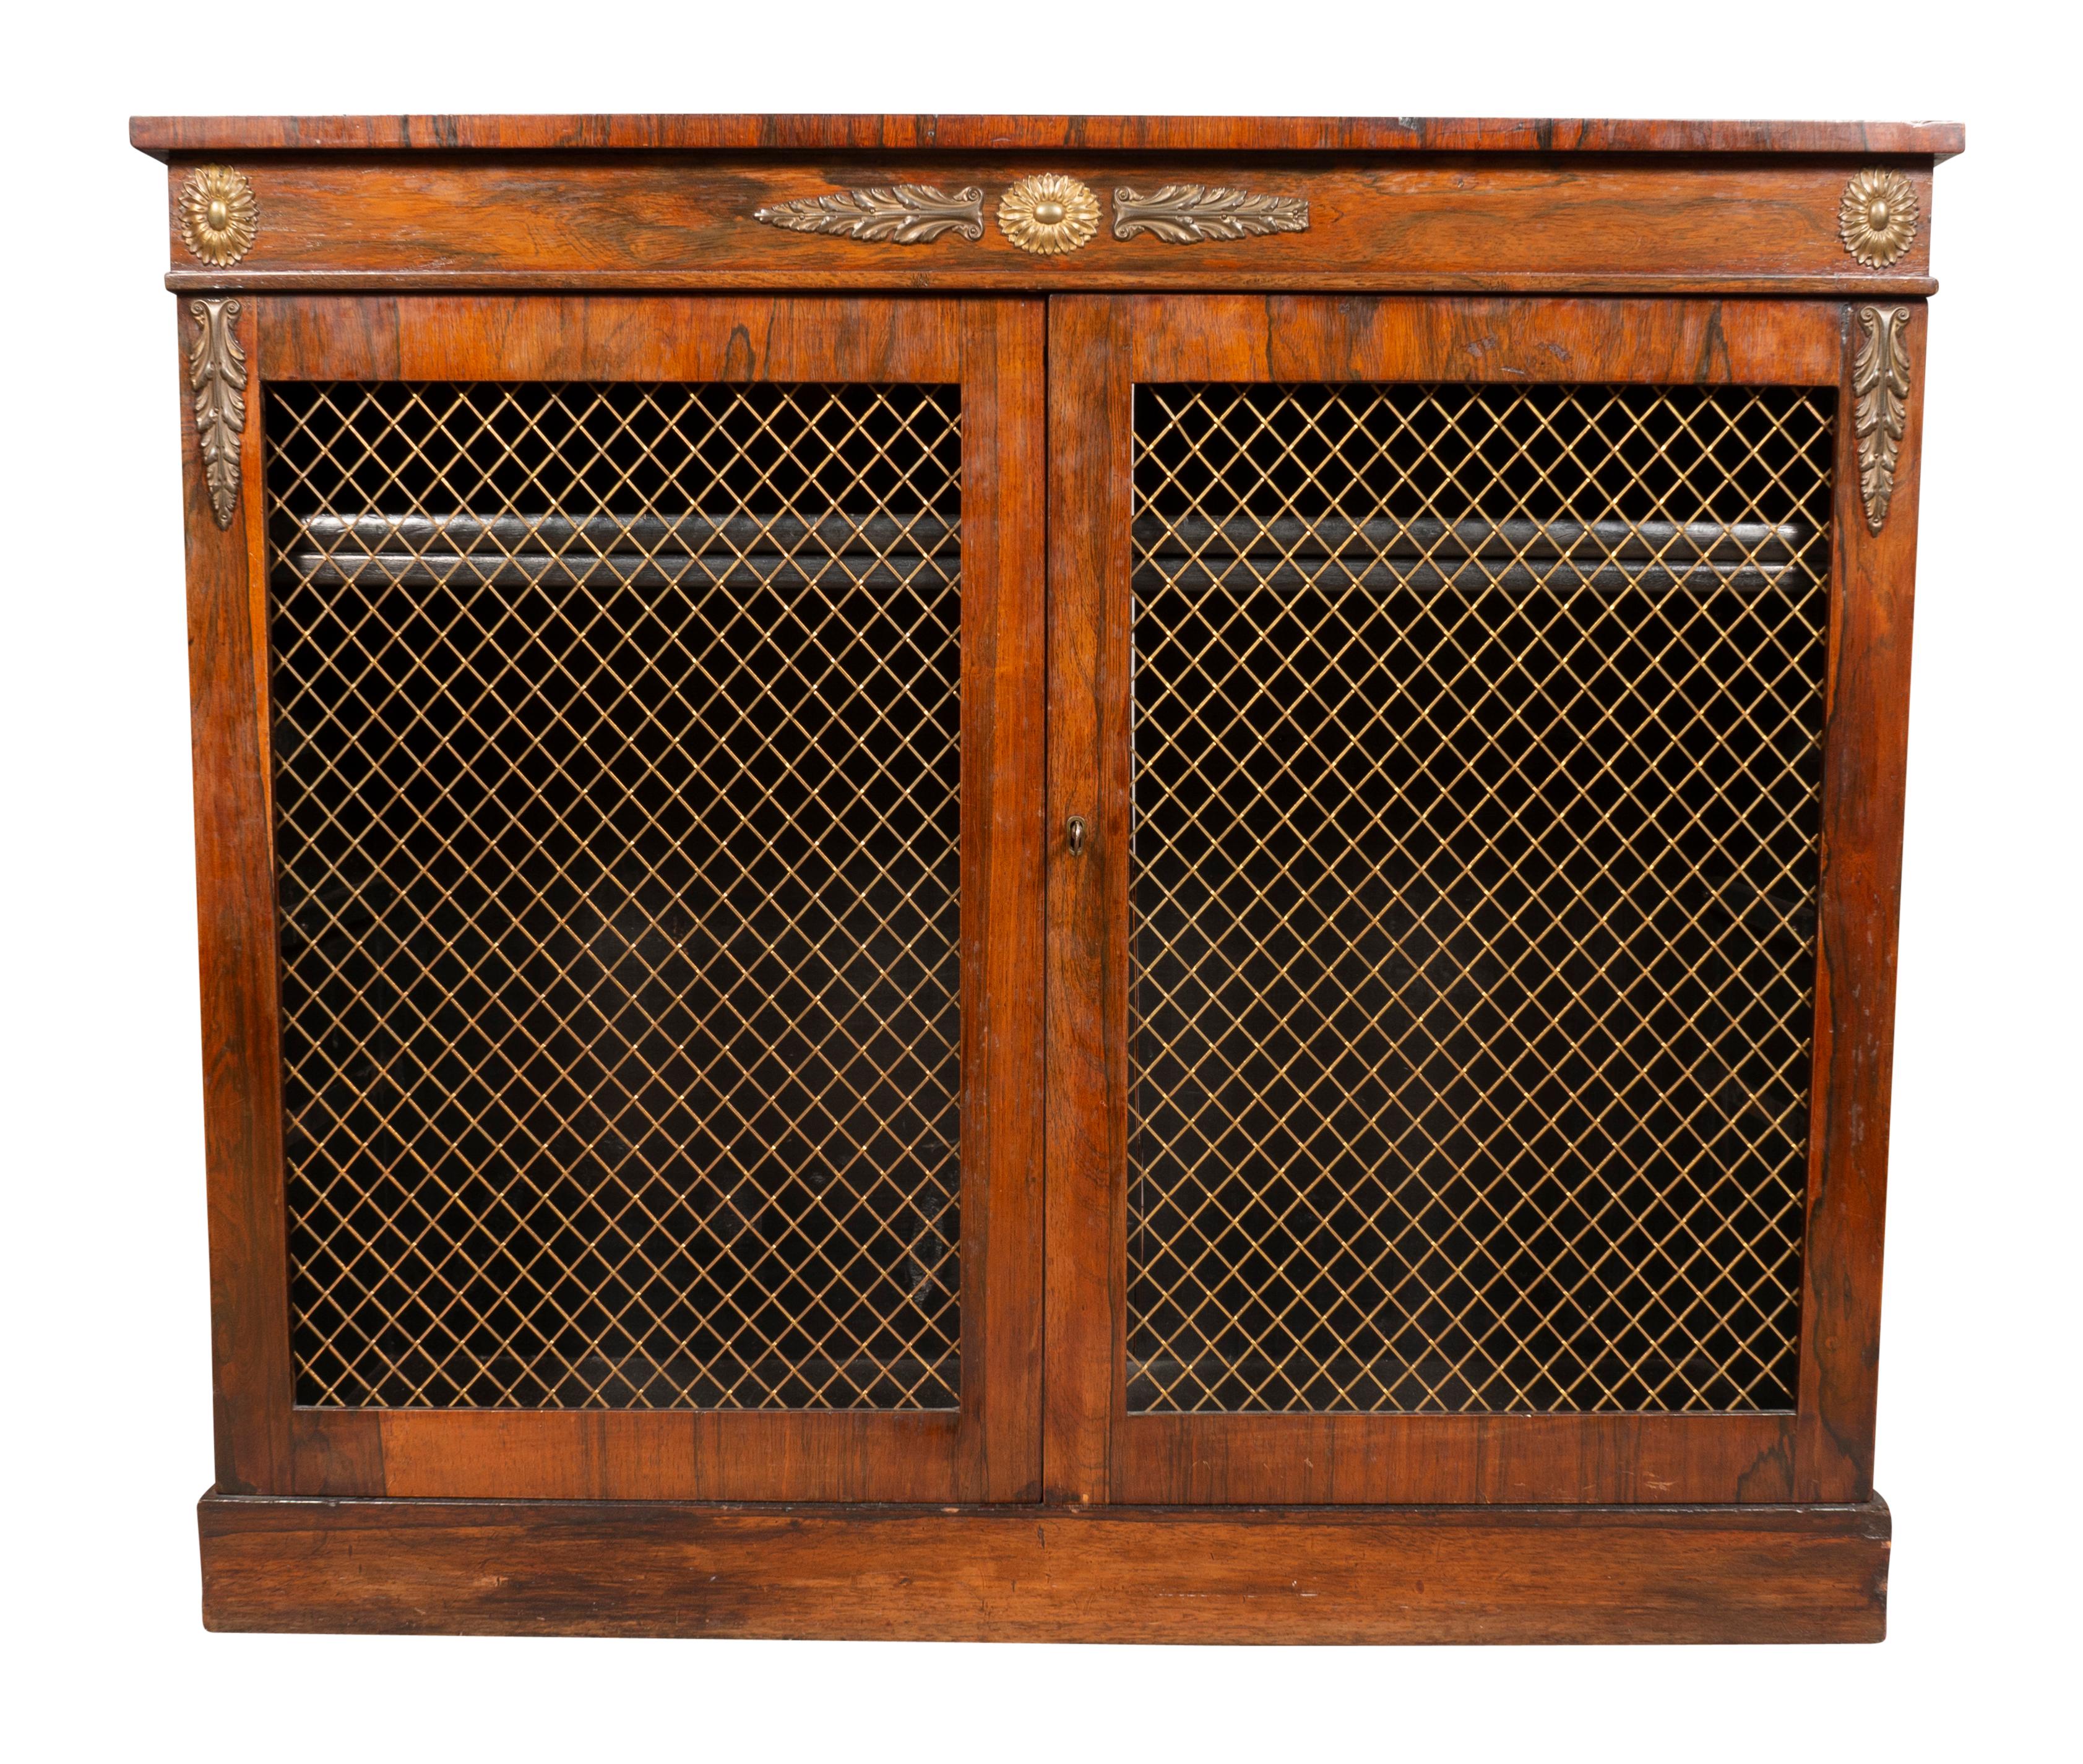 Rectangular top with short back board over a frieze with brass mounts and a pair of grill doors enclosing two shelves. Plinth base.